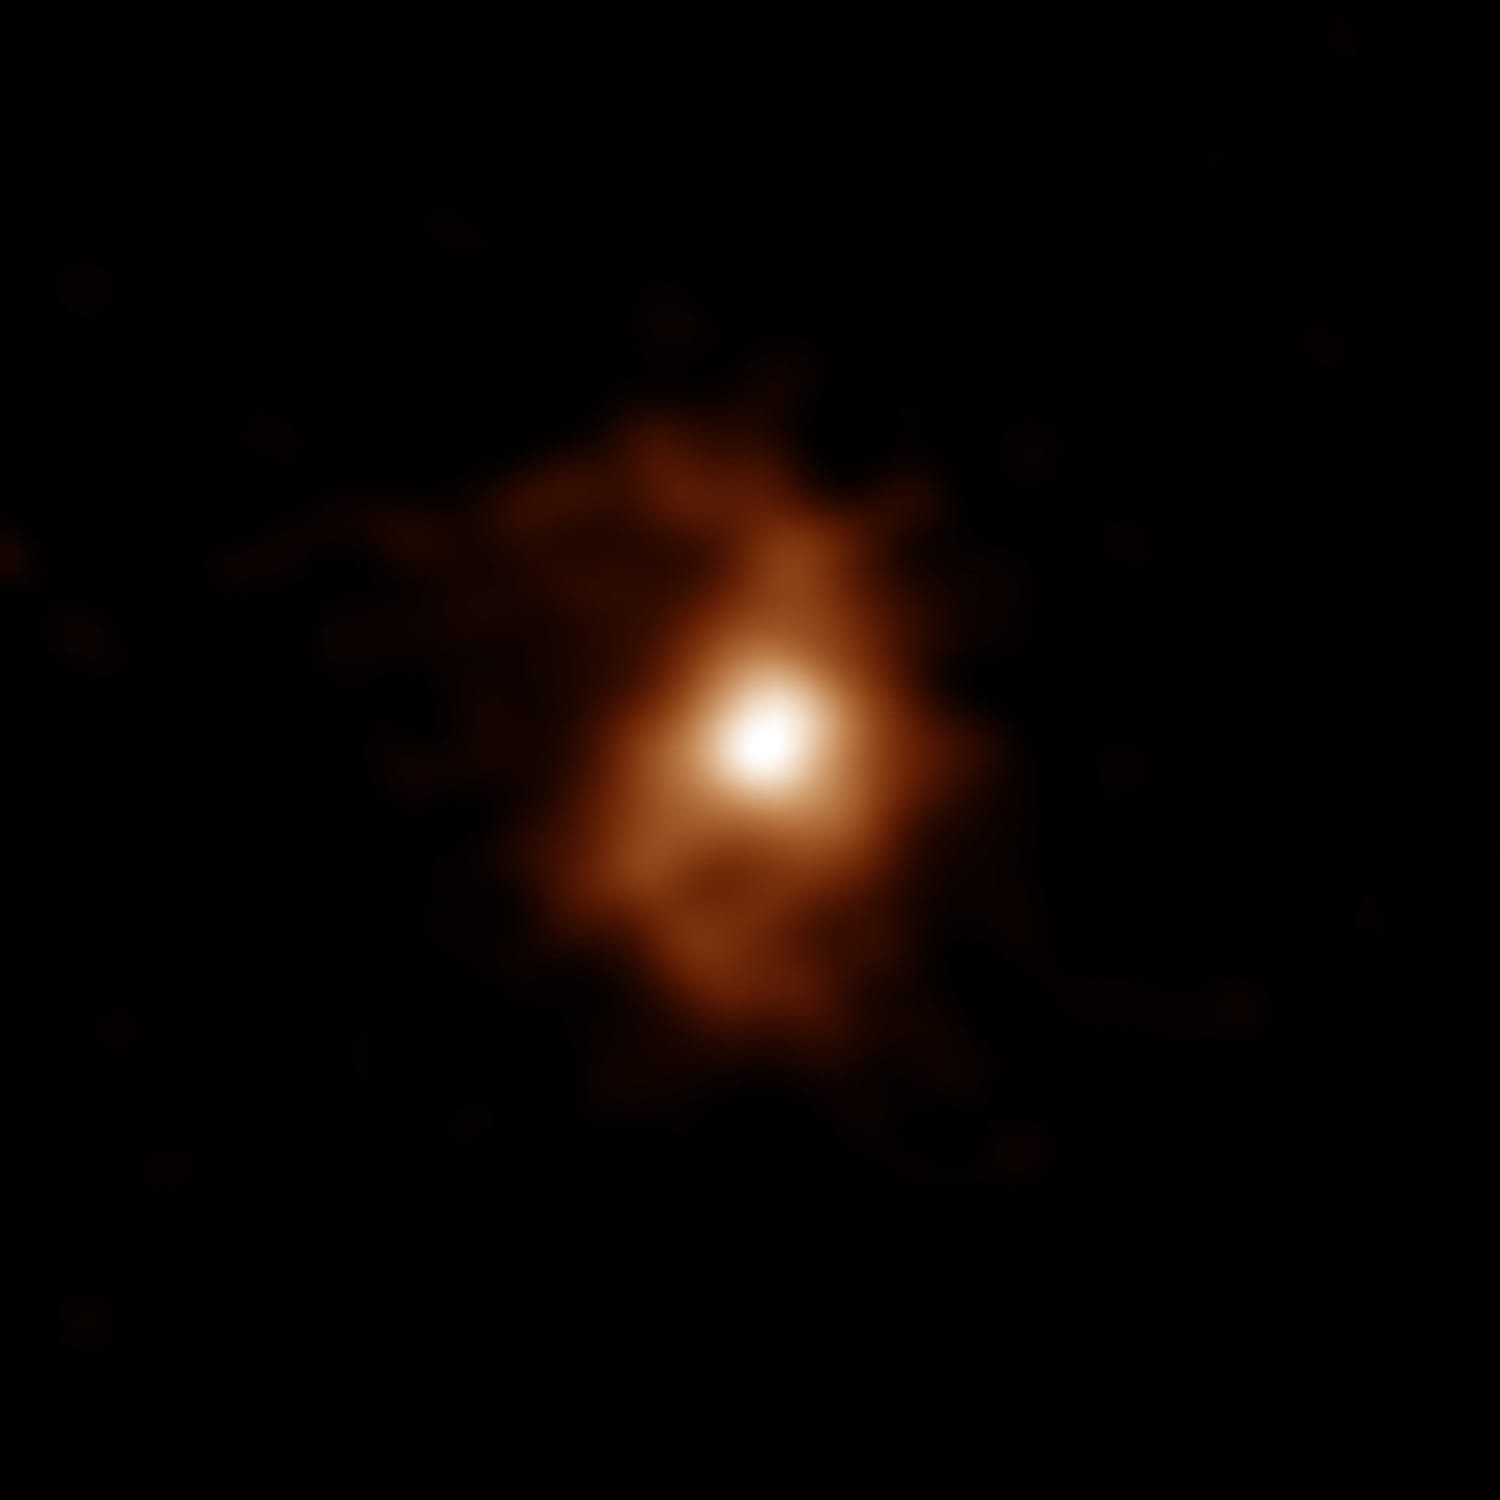 Astronomers spot what could be the earliest spiral galaxy ever seen.